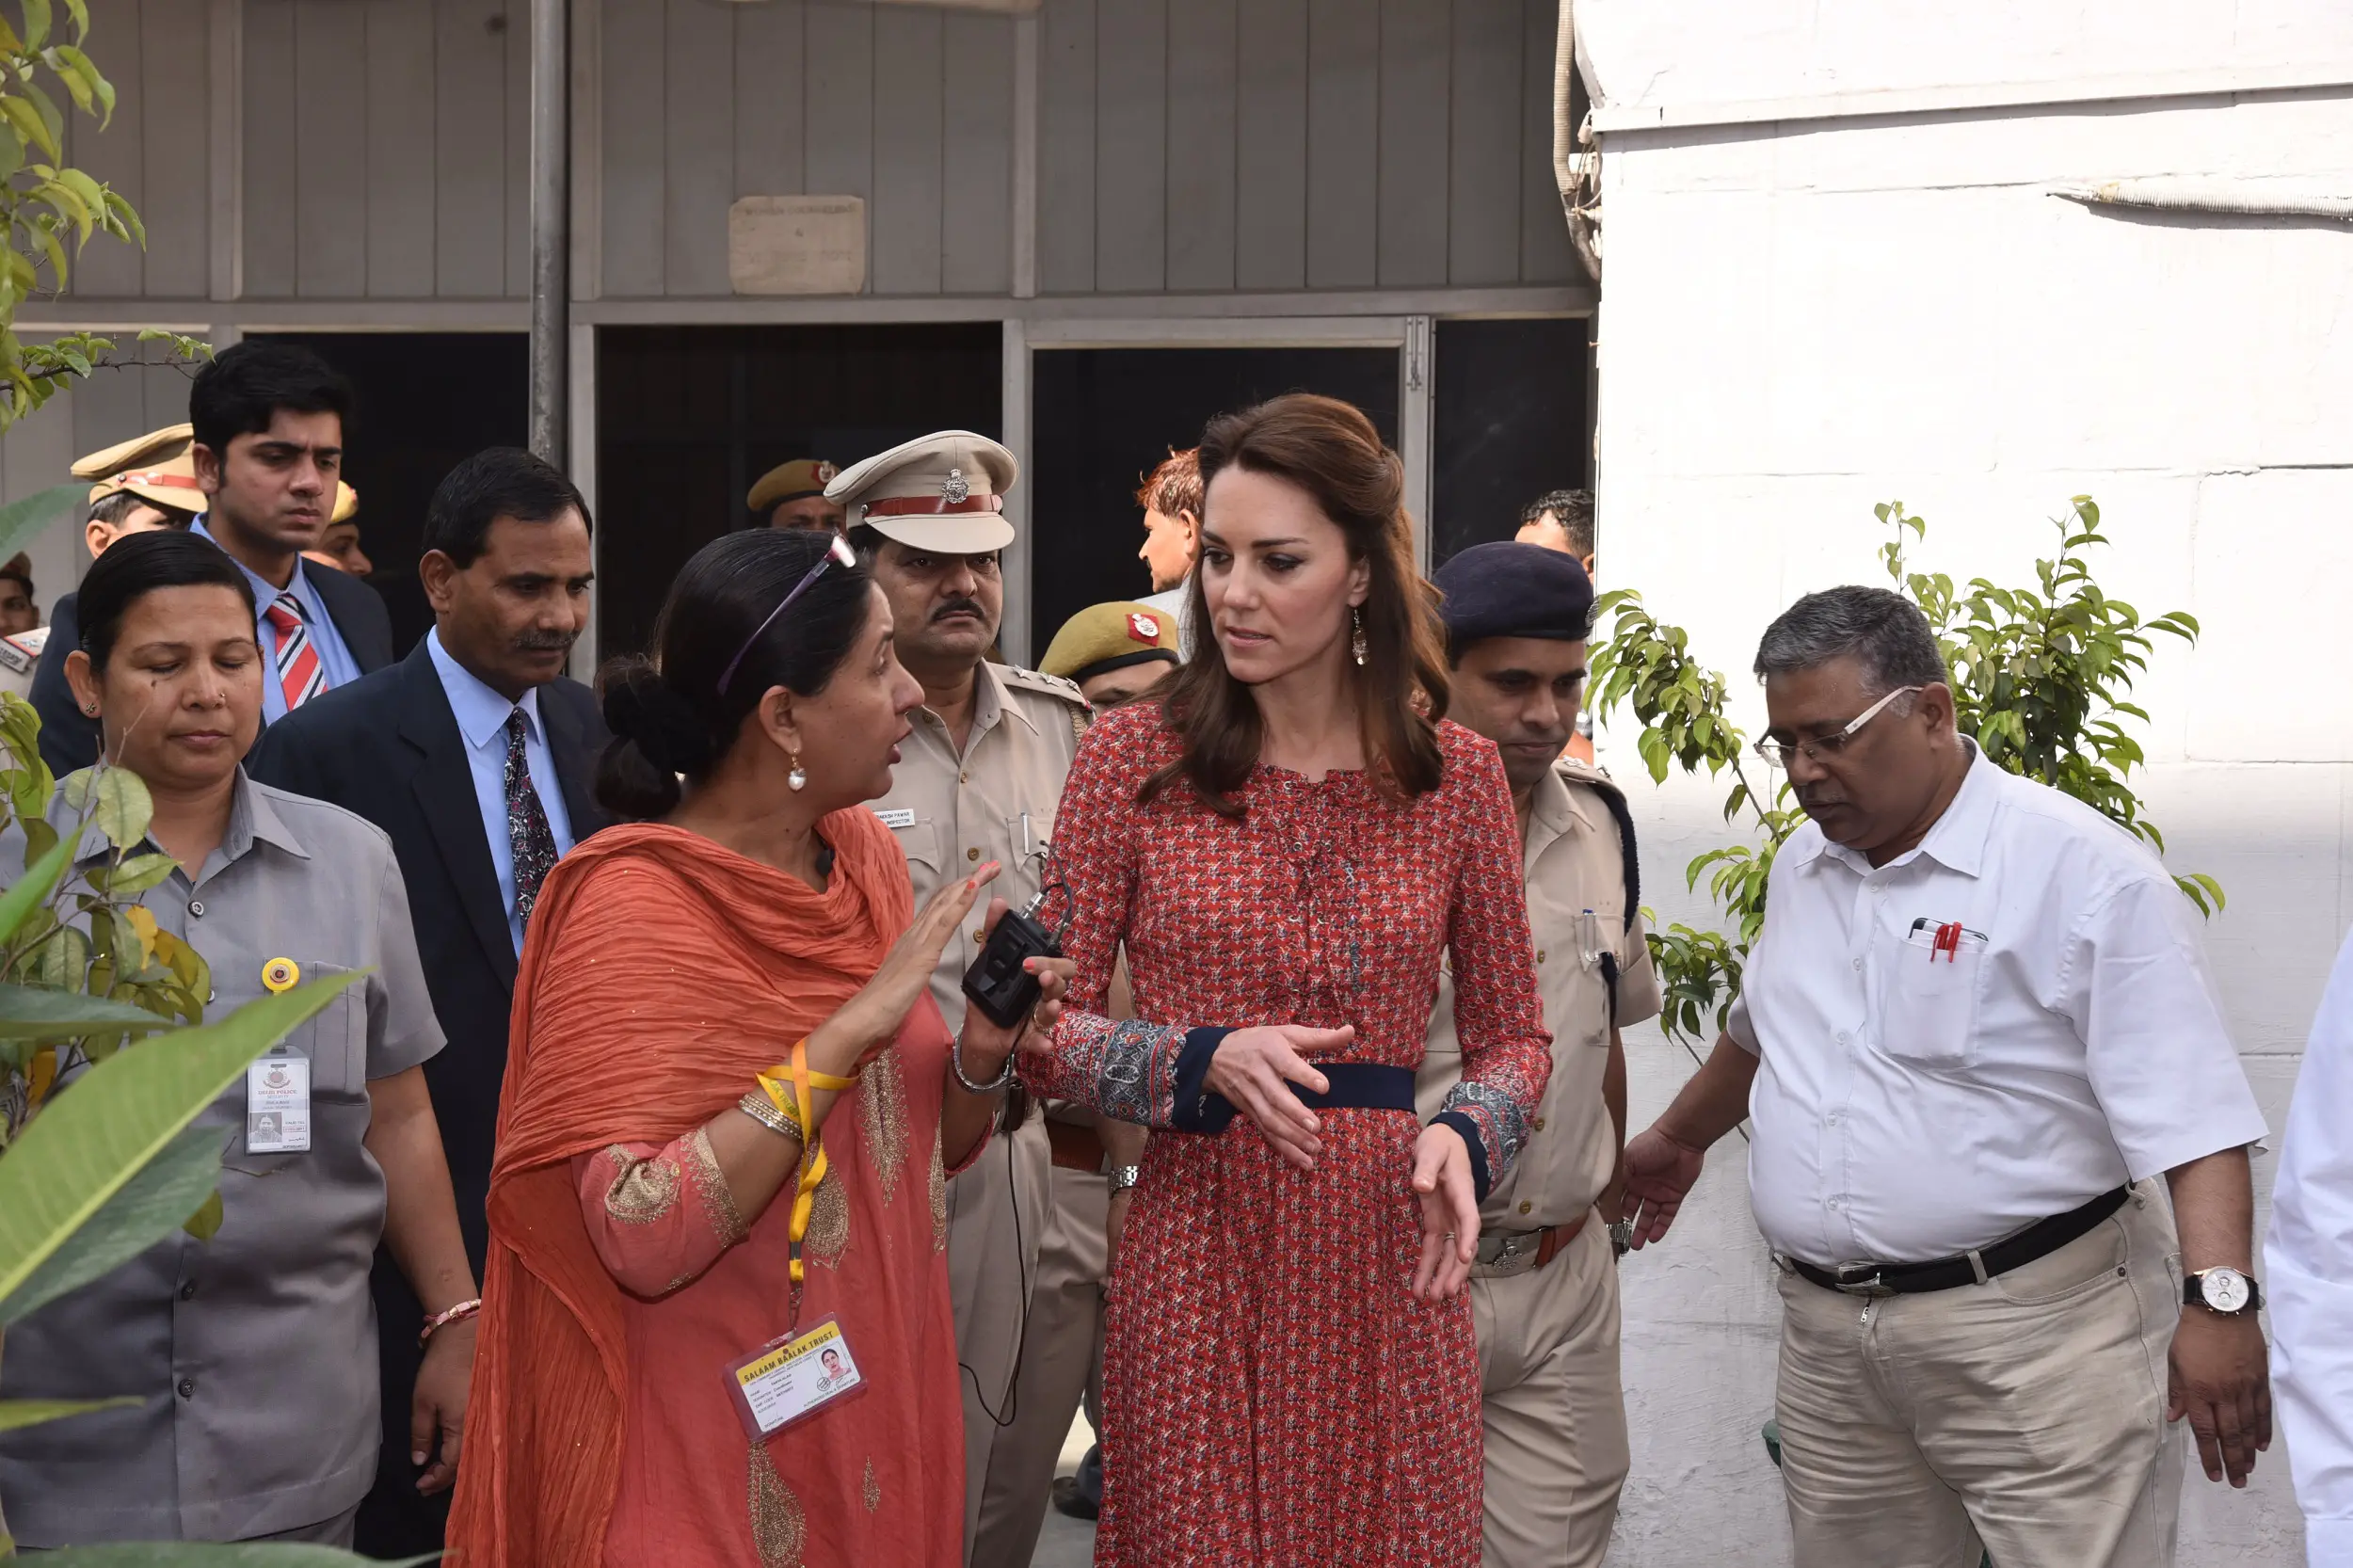 Duke andThe Duchess of Cambridge visited Salaam Baalak Trust during India Tour in April 2016